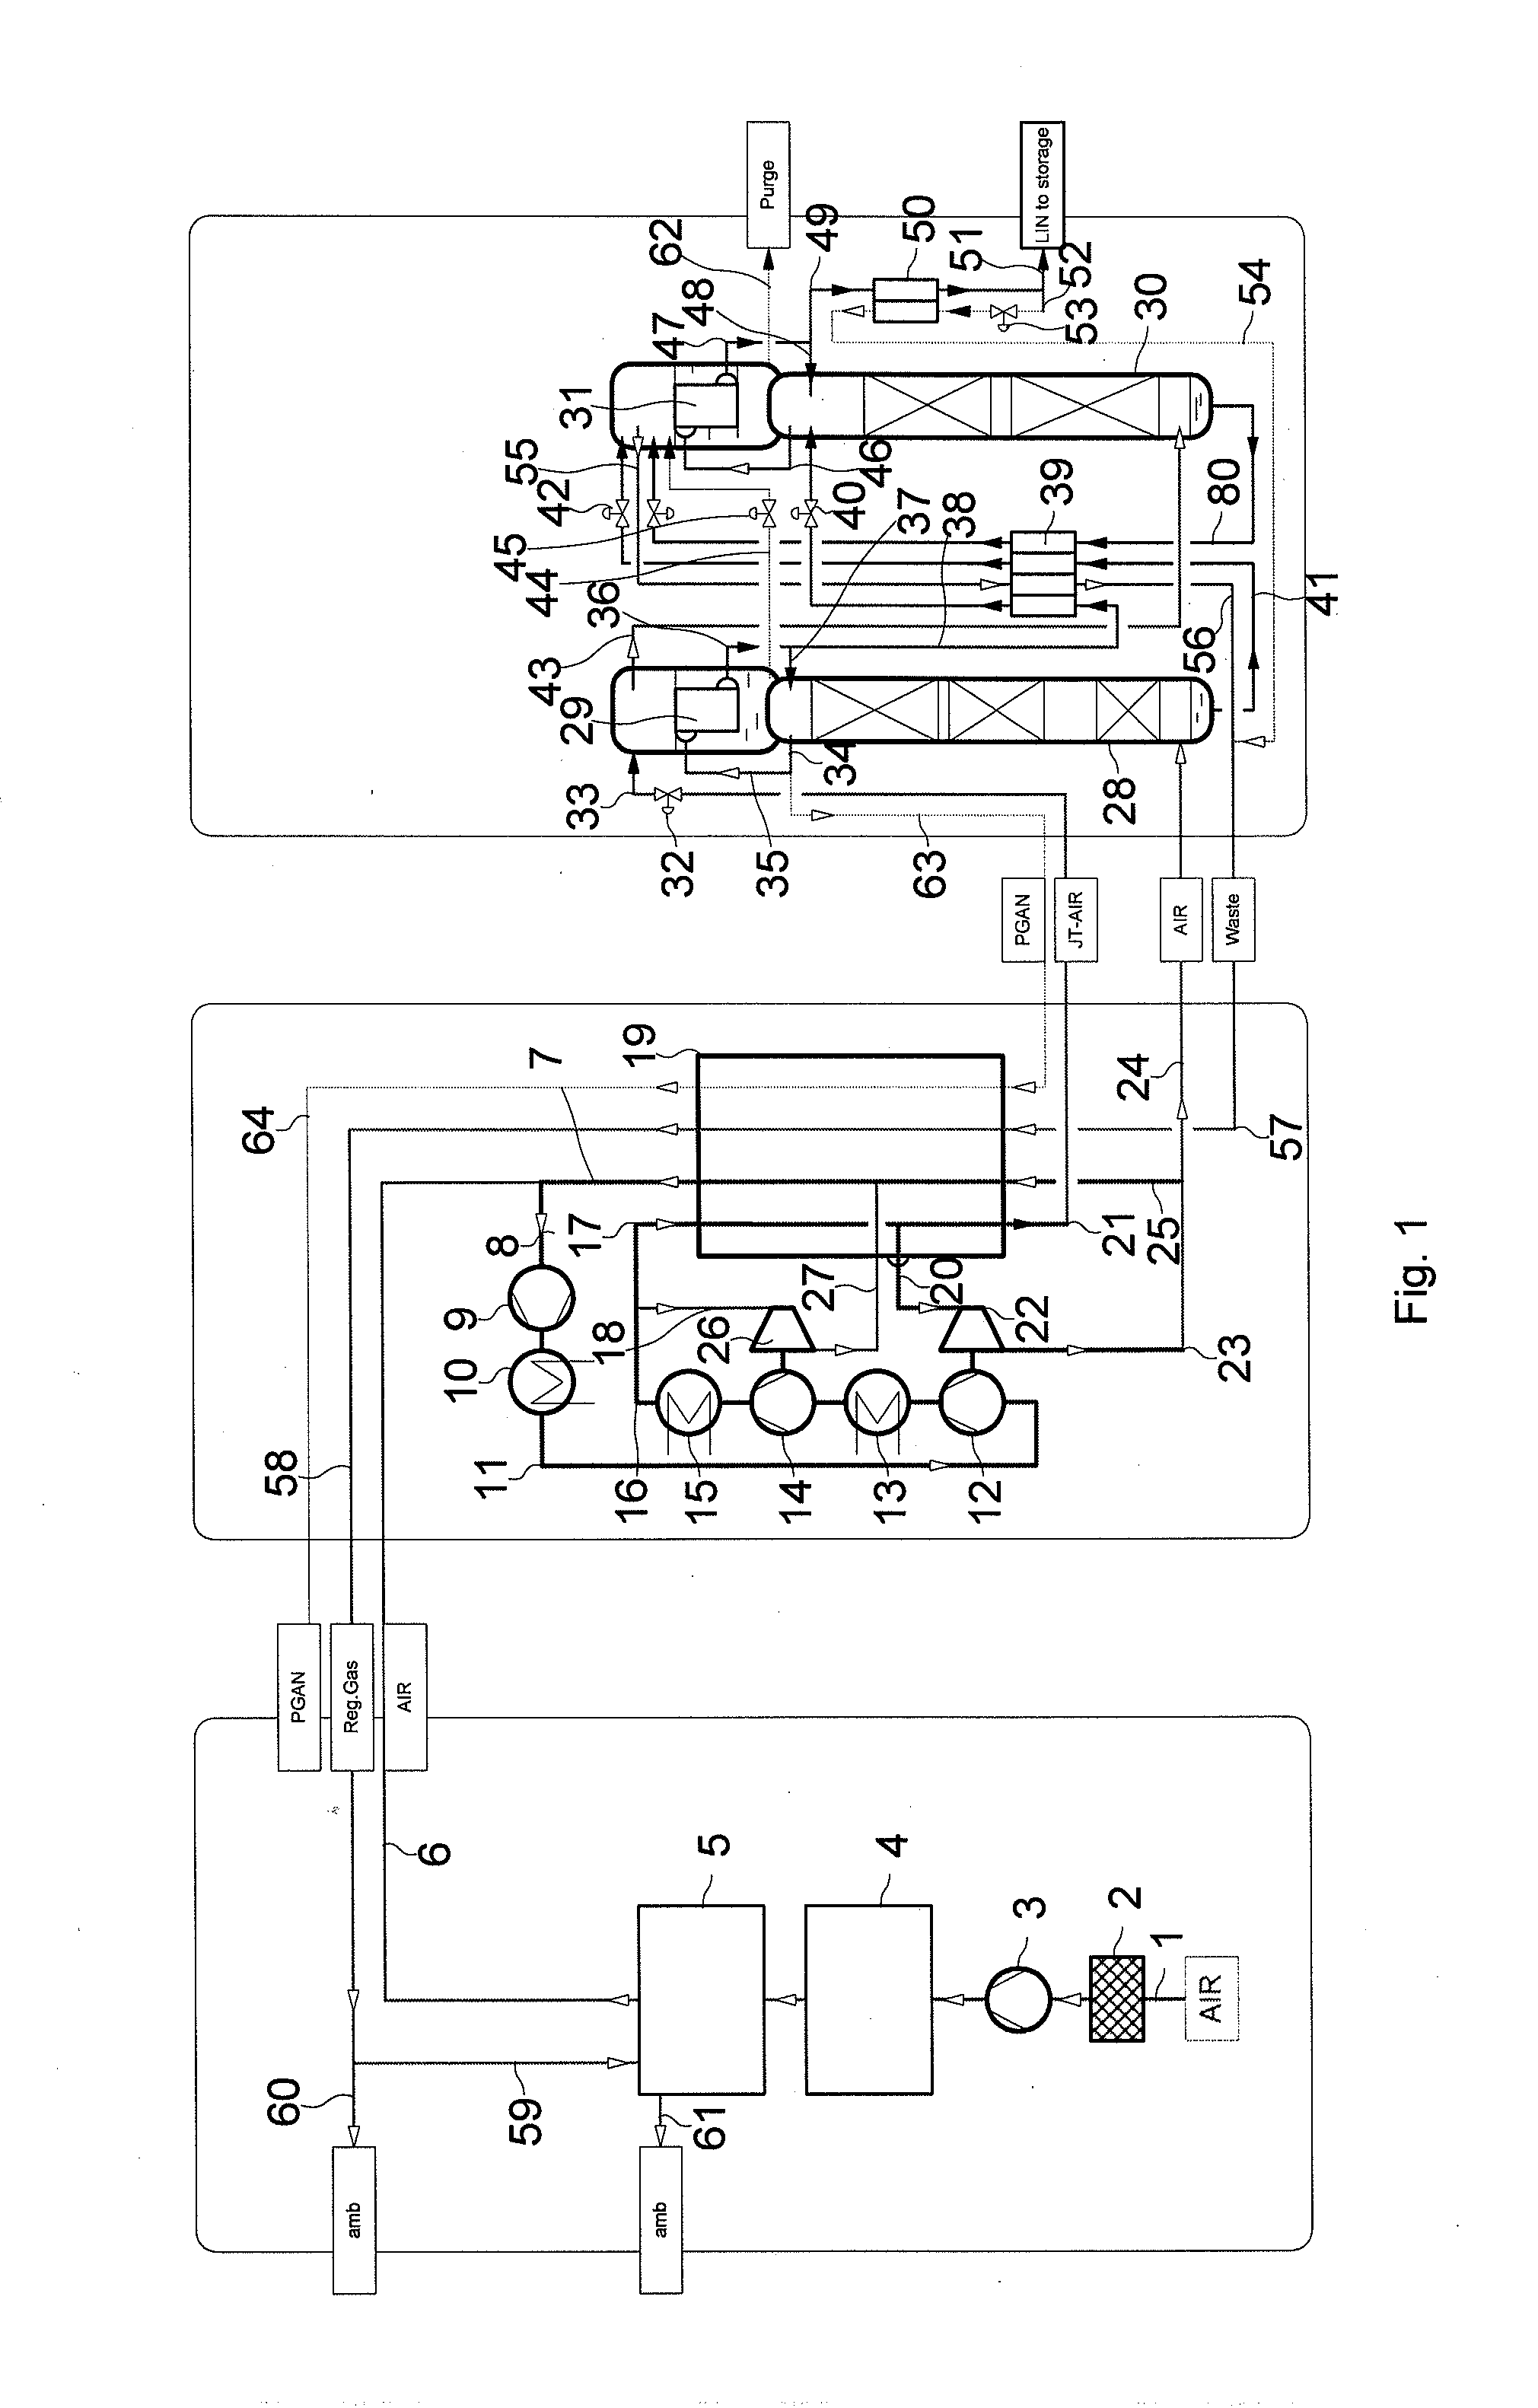 Process and Device for Obtaining Liquid Nitrogen by Low Temperature Air Fractionation